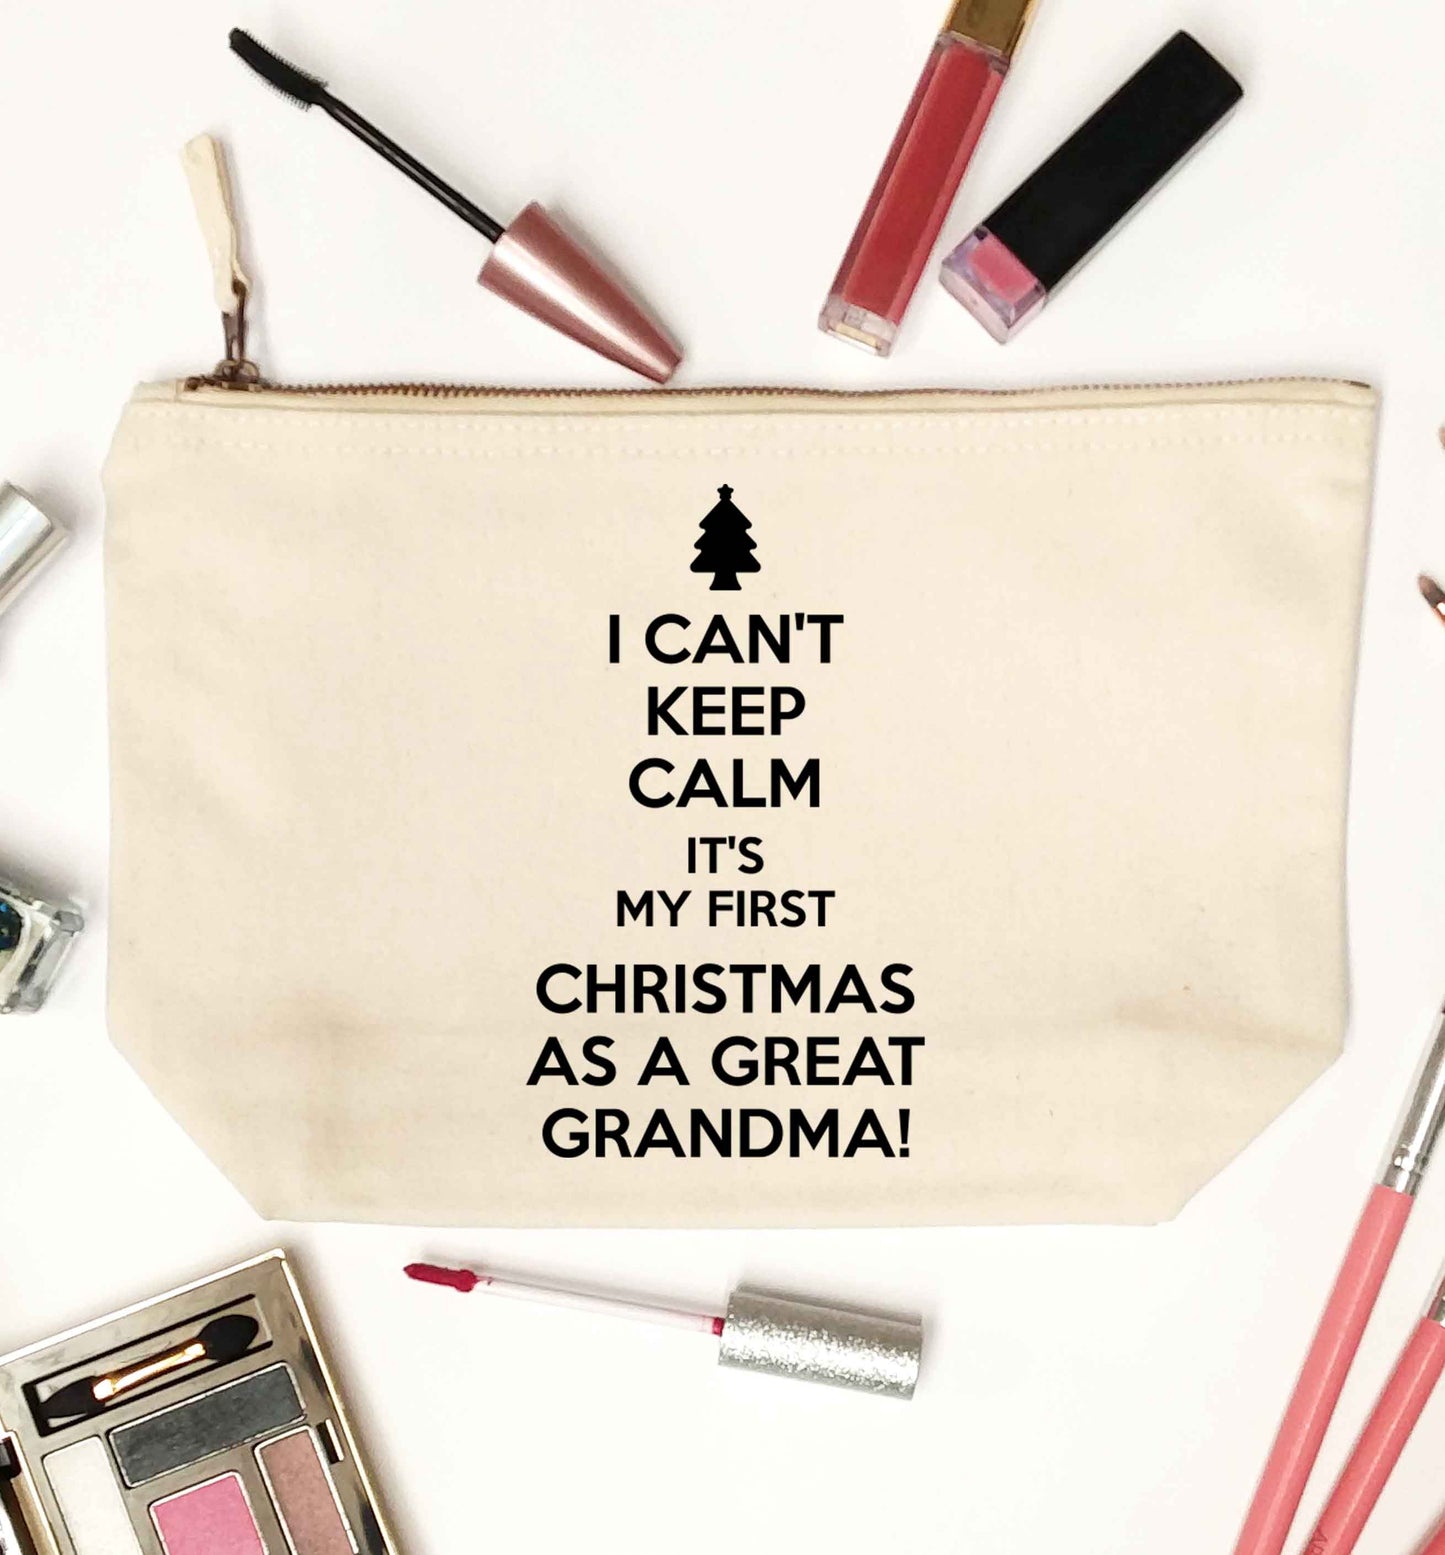 I can't keep calm it's my first Christmas as a great grandma! natural makeup bag